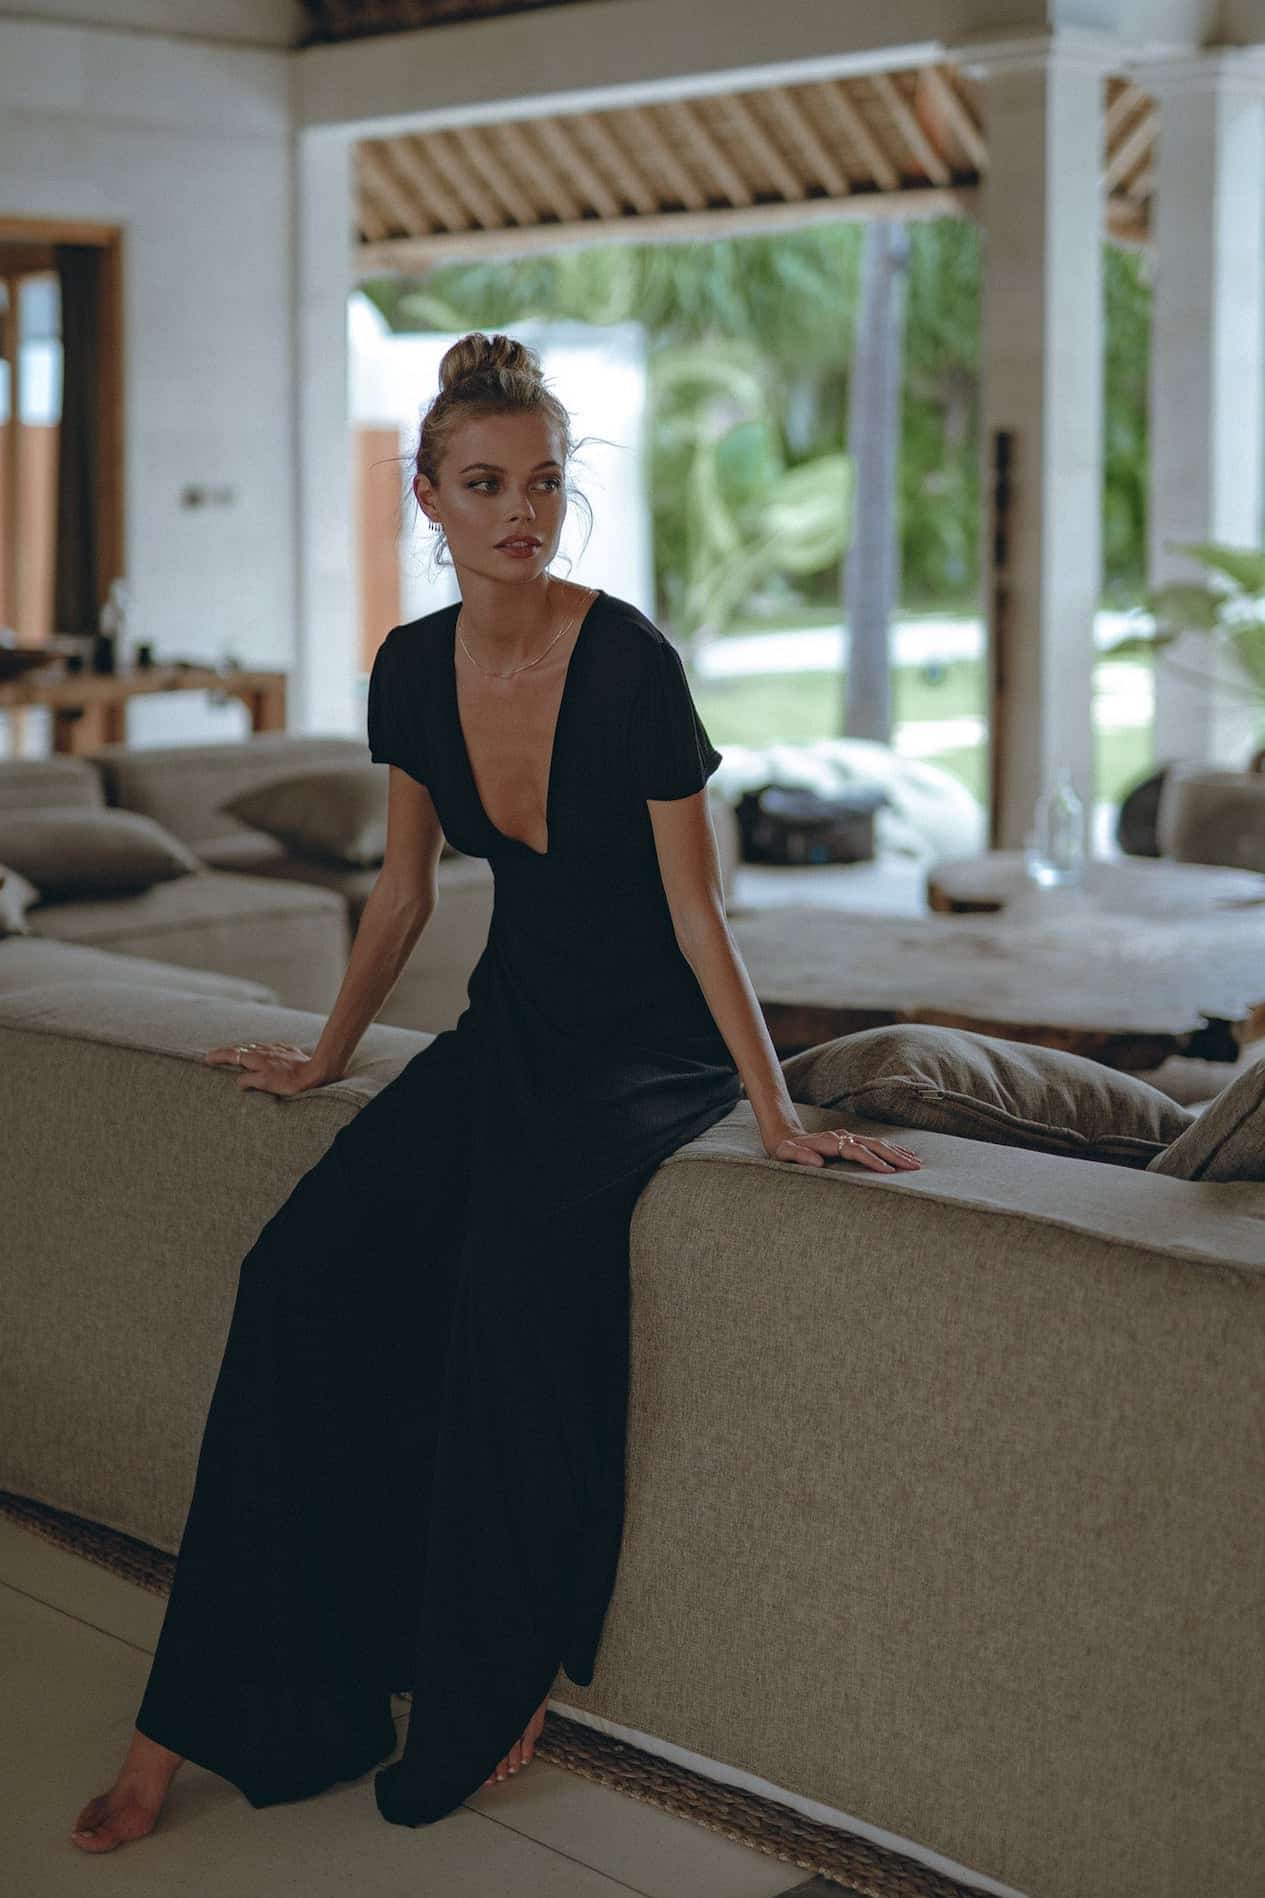 A woman in a black maxi dress leaning against a couch in a tropical destination.